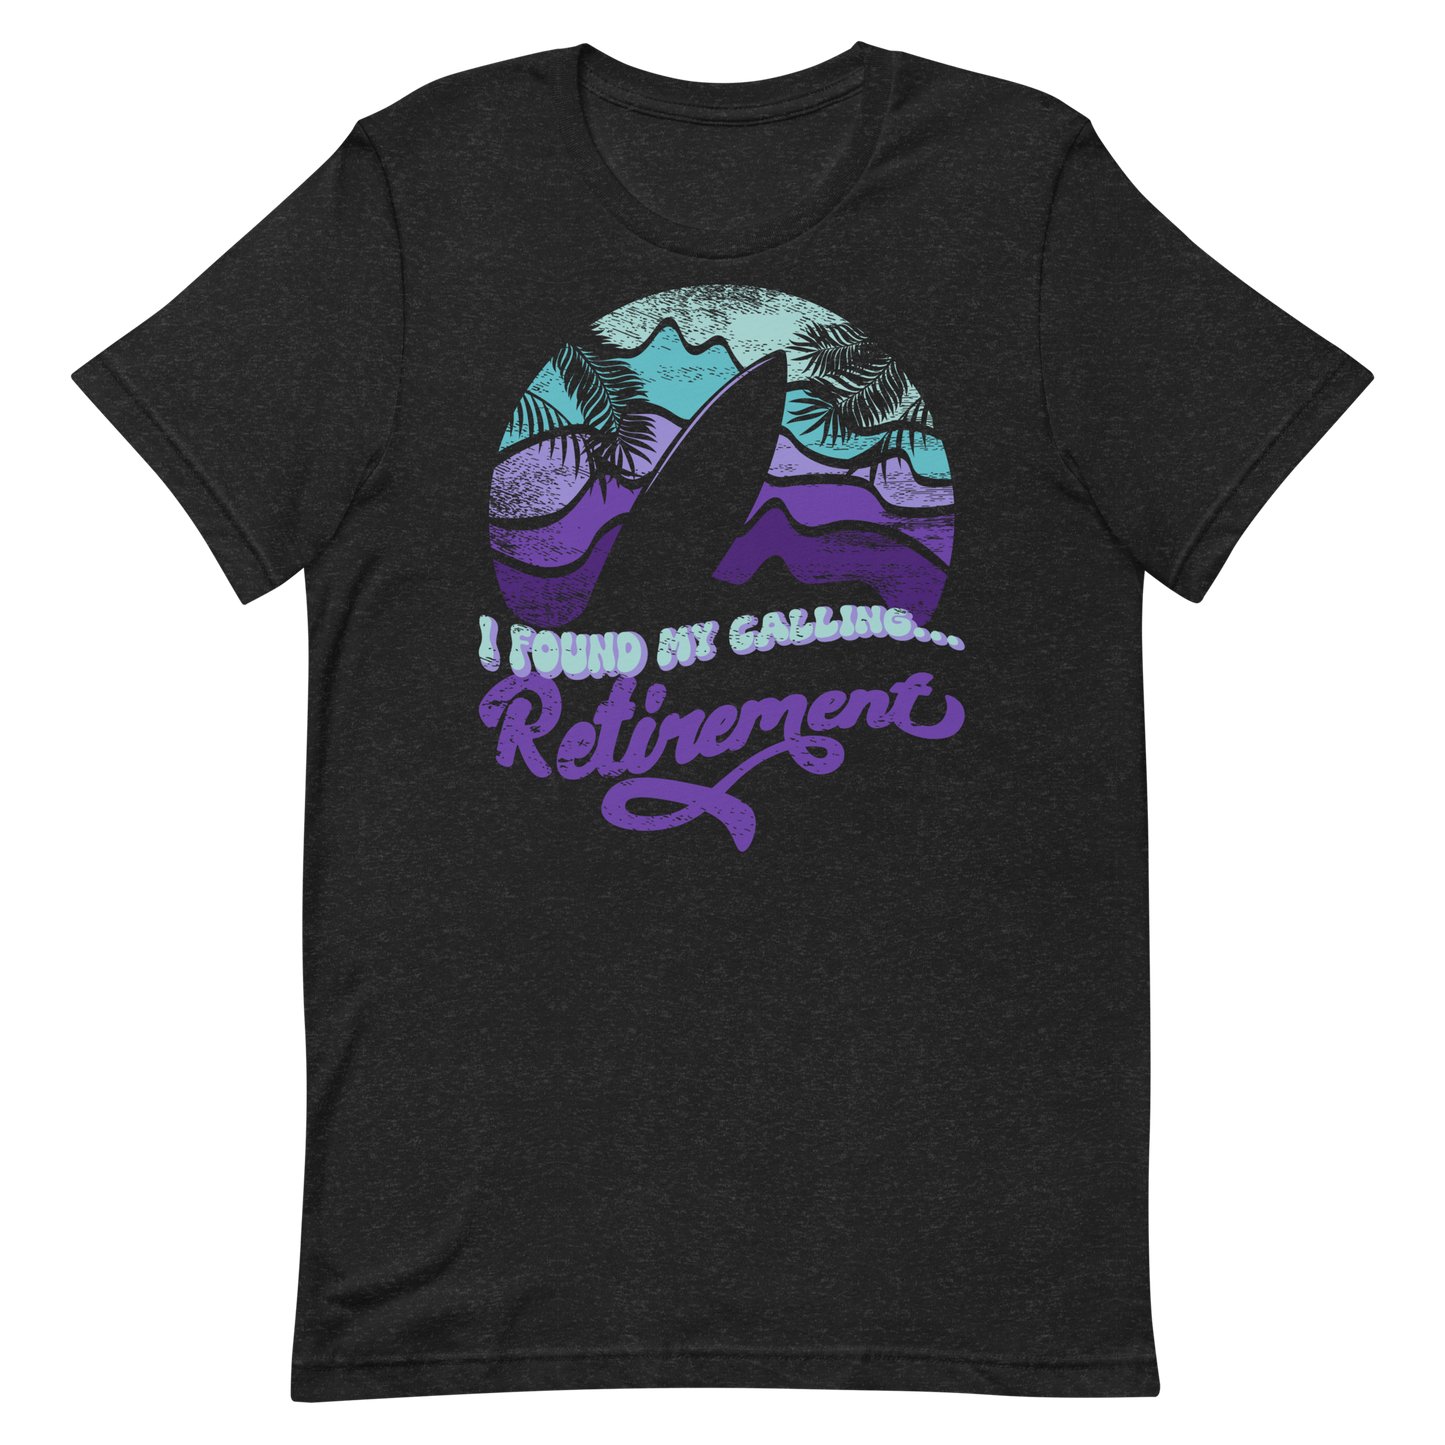 Retro Unisex T-Shirt - Surfboard With a Retirement Quote Black Heather